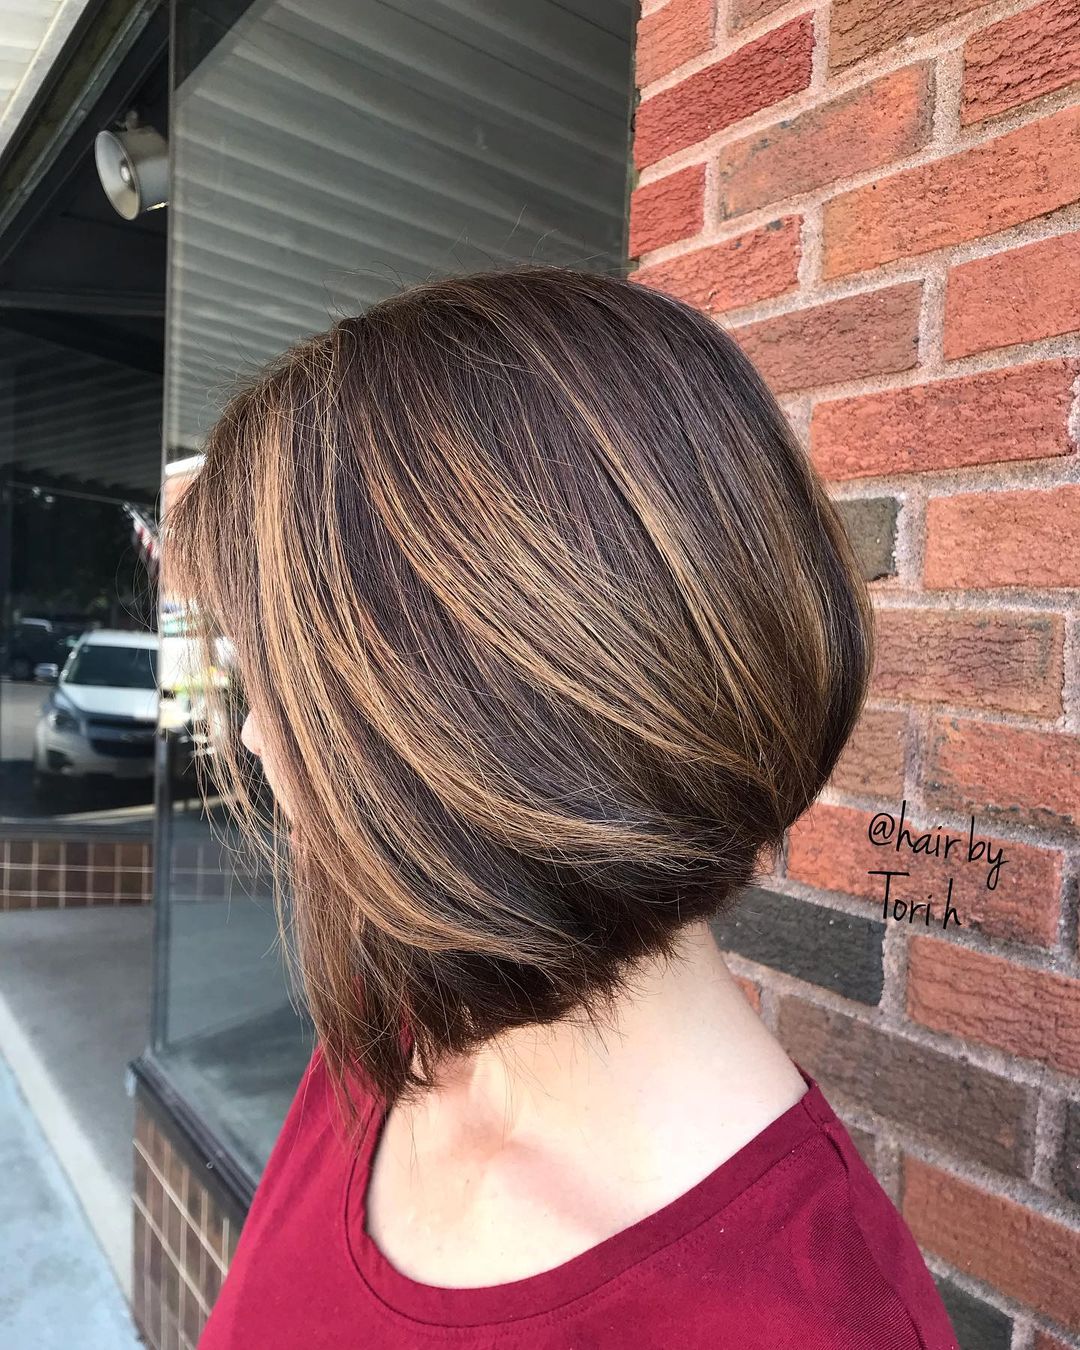 Stacked Bob 61 Long stacked bob | Medium length stacked bob | Pictures of stacked bob haircuts front and back Stacked Bob Hairstyles for Women